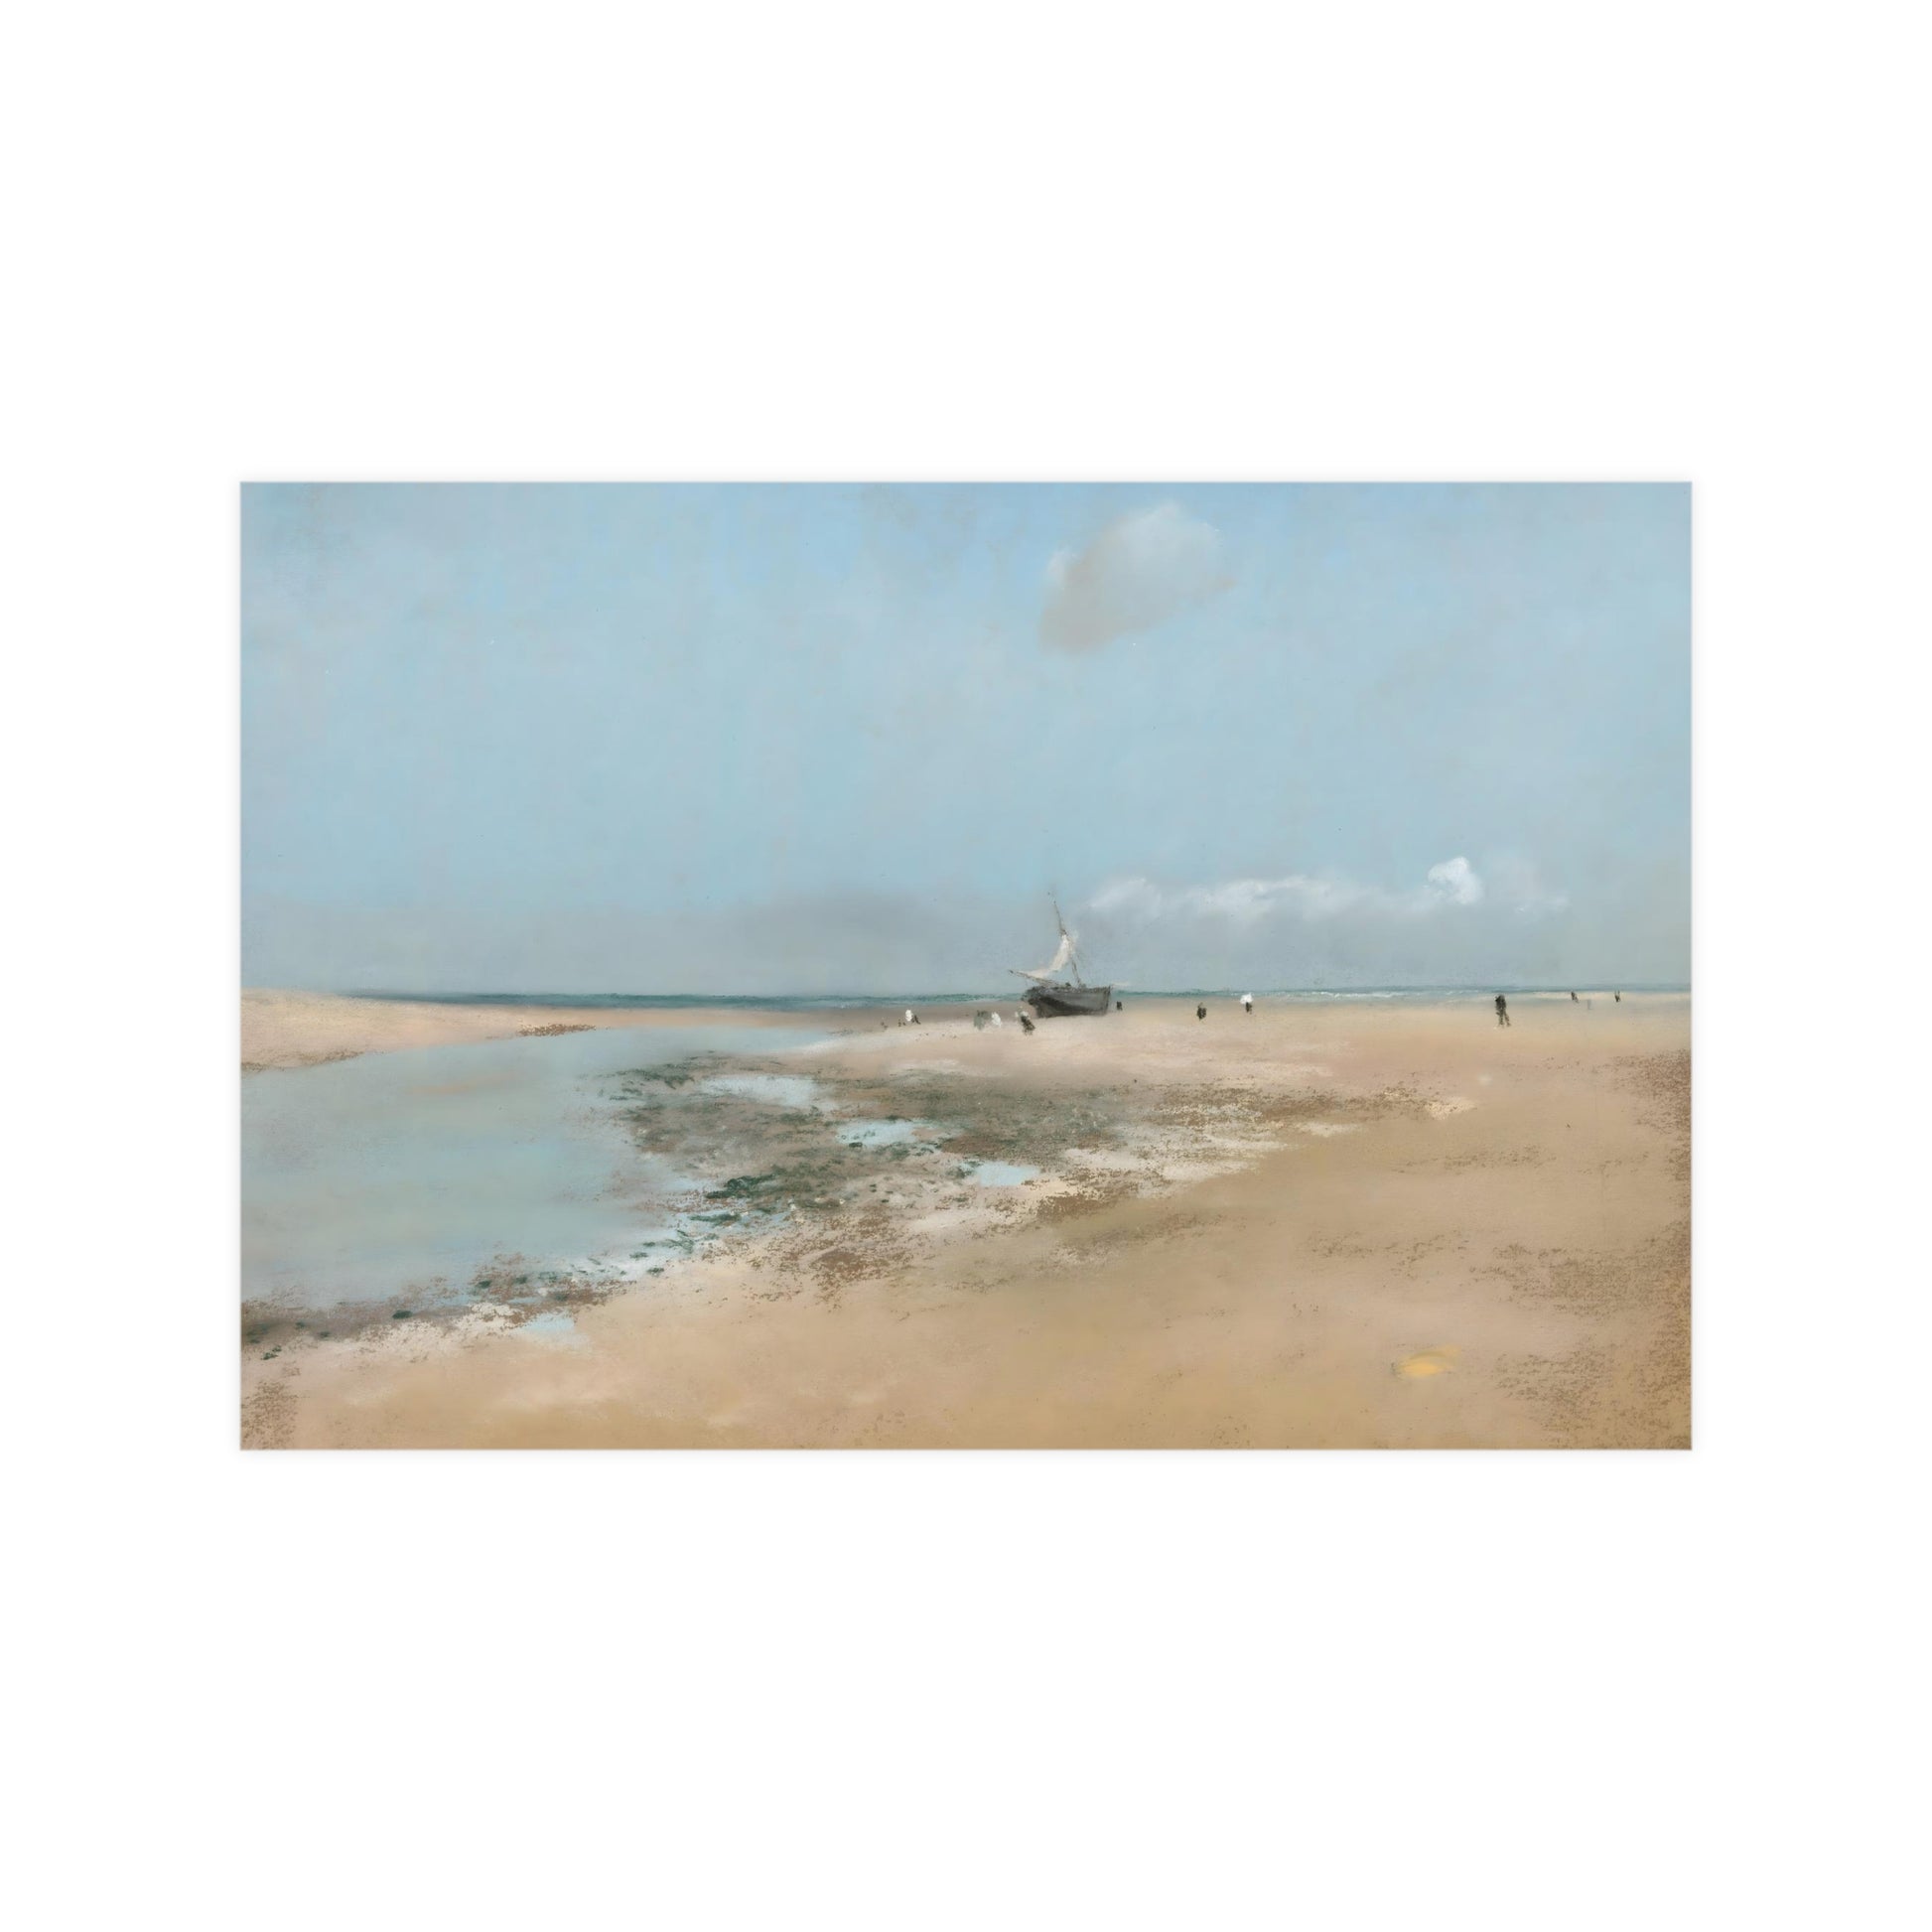   Beach at Low Tide (Mouth of the River) (1869)  digitally enhanced by Lisa Burningham designs